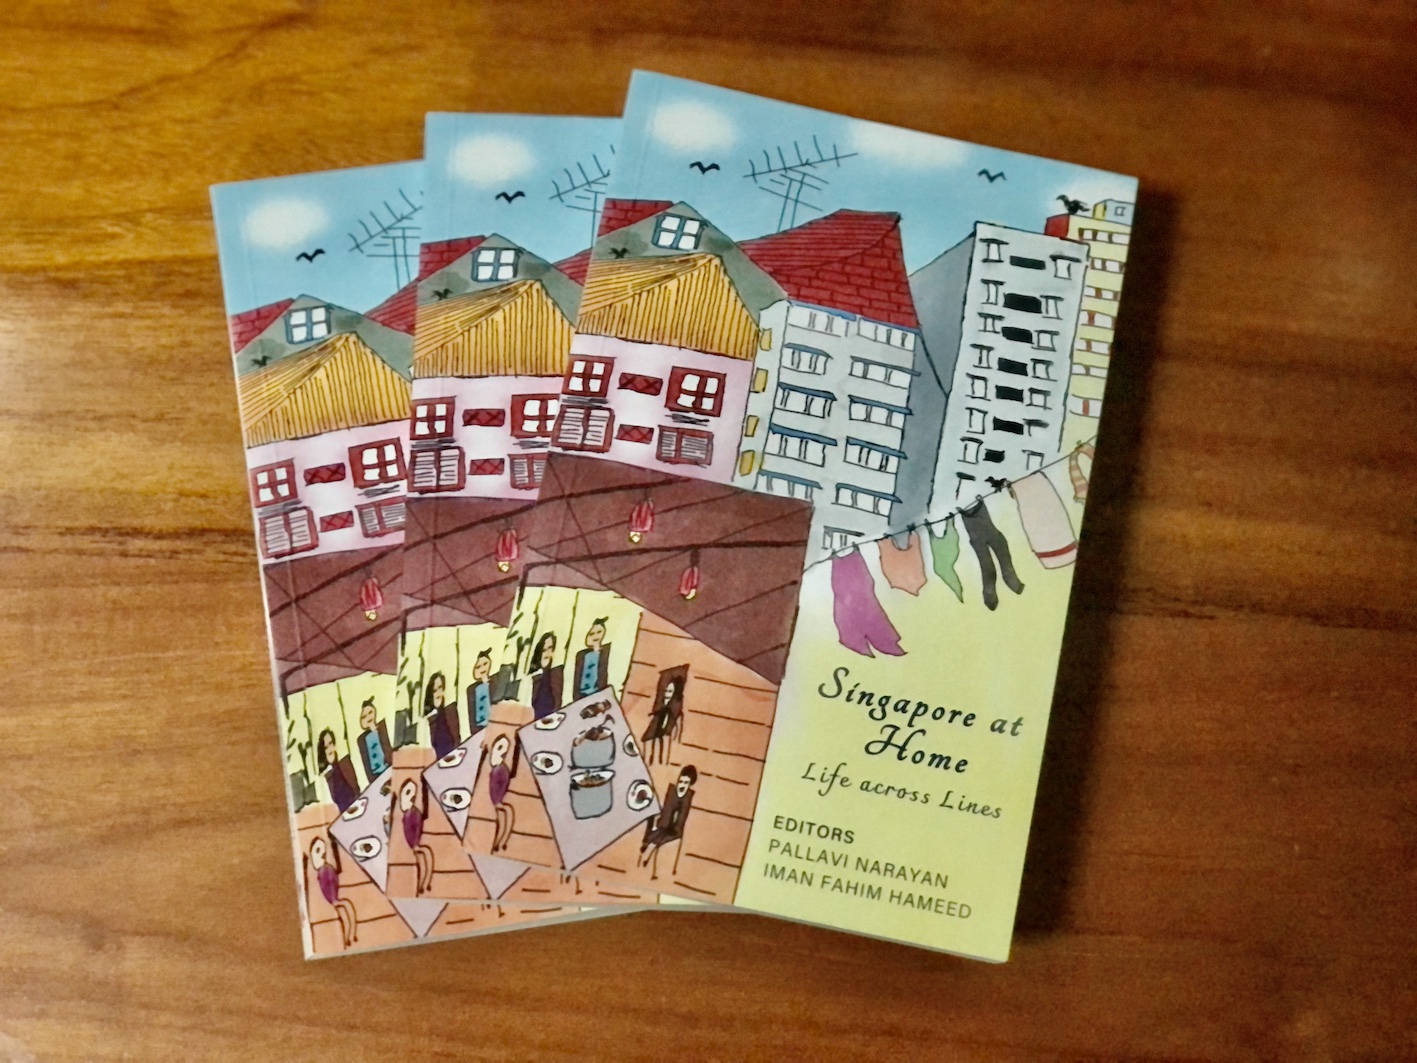 Singapore At Home – Contributing To An Anthology